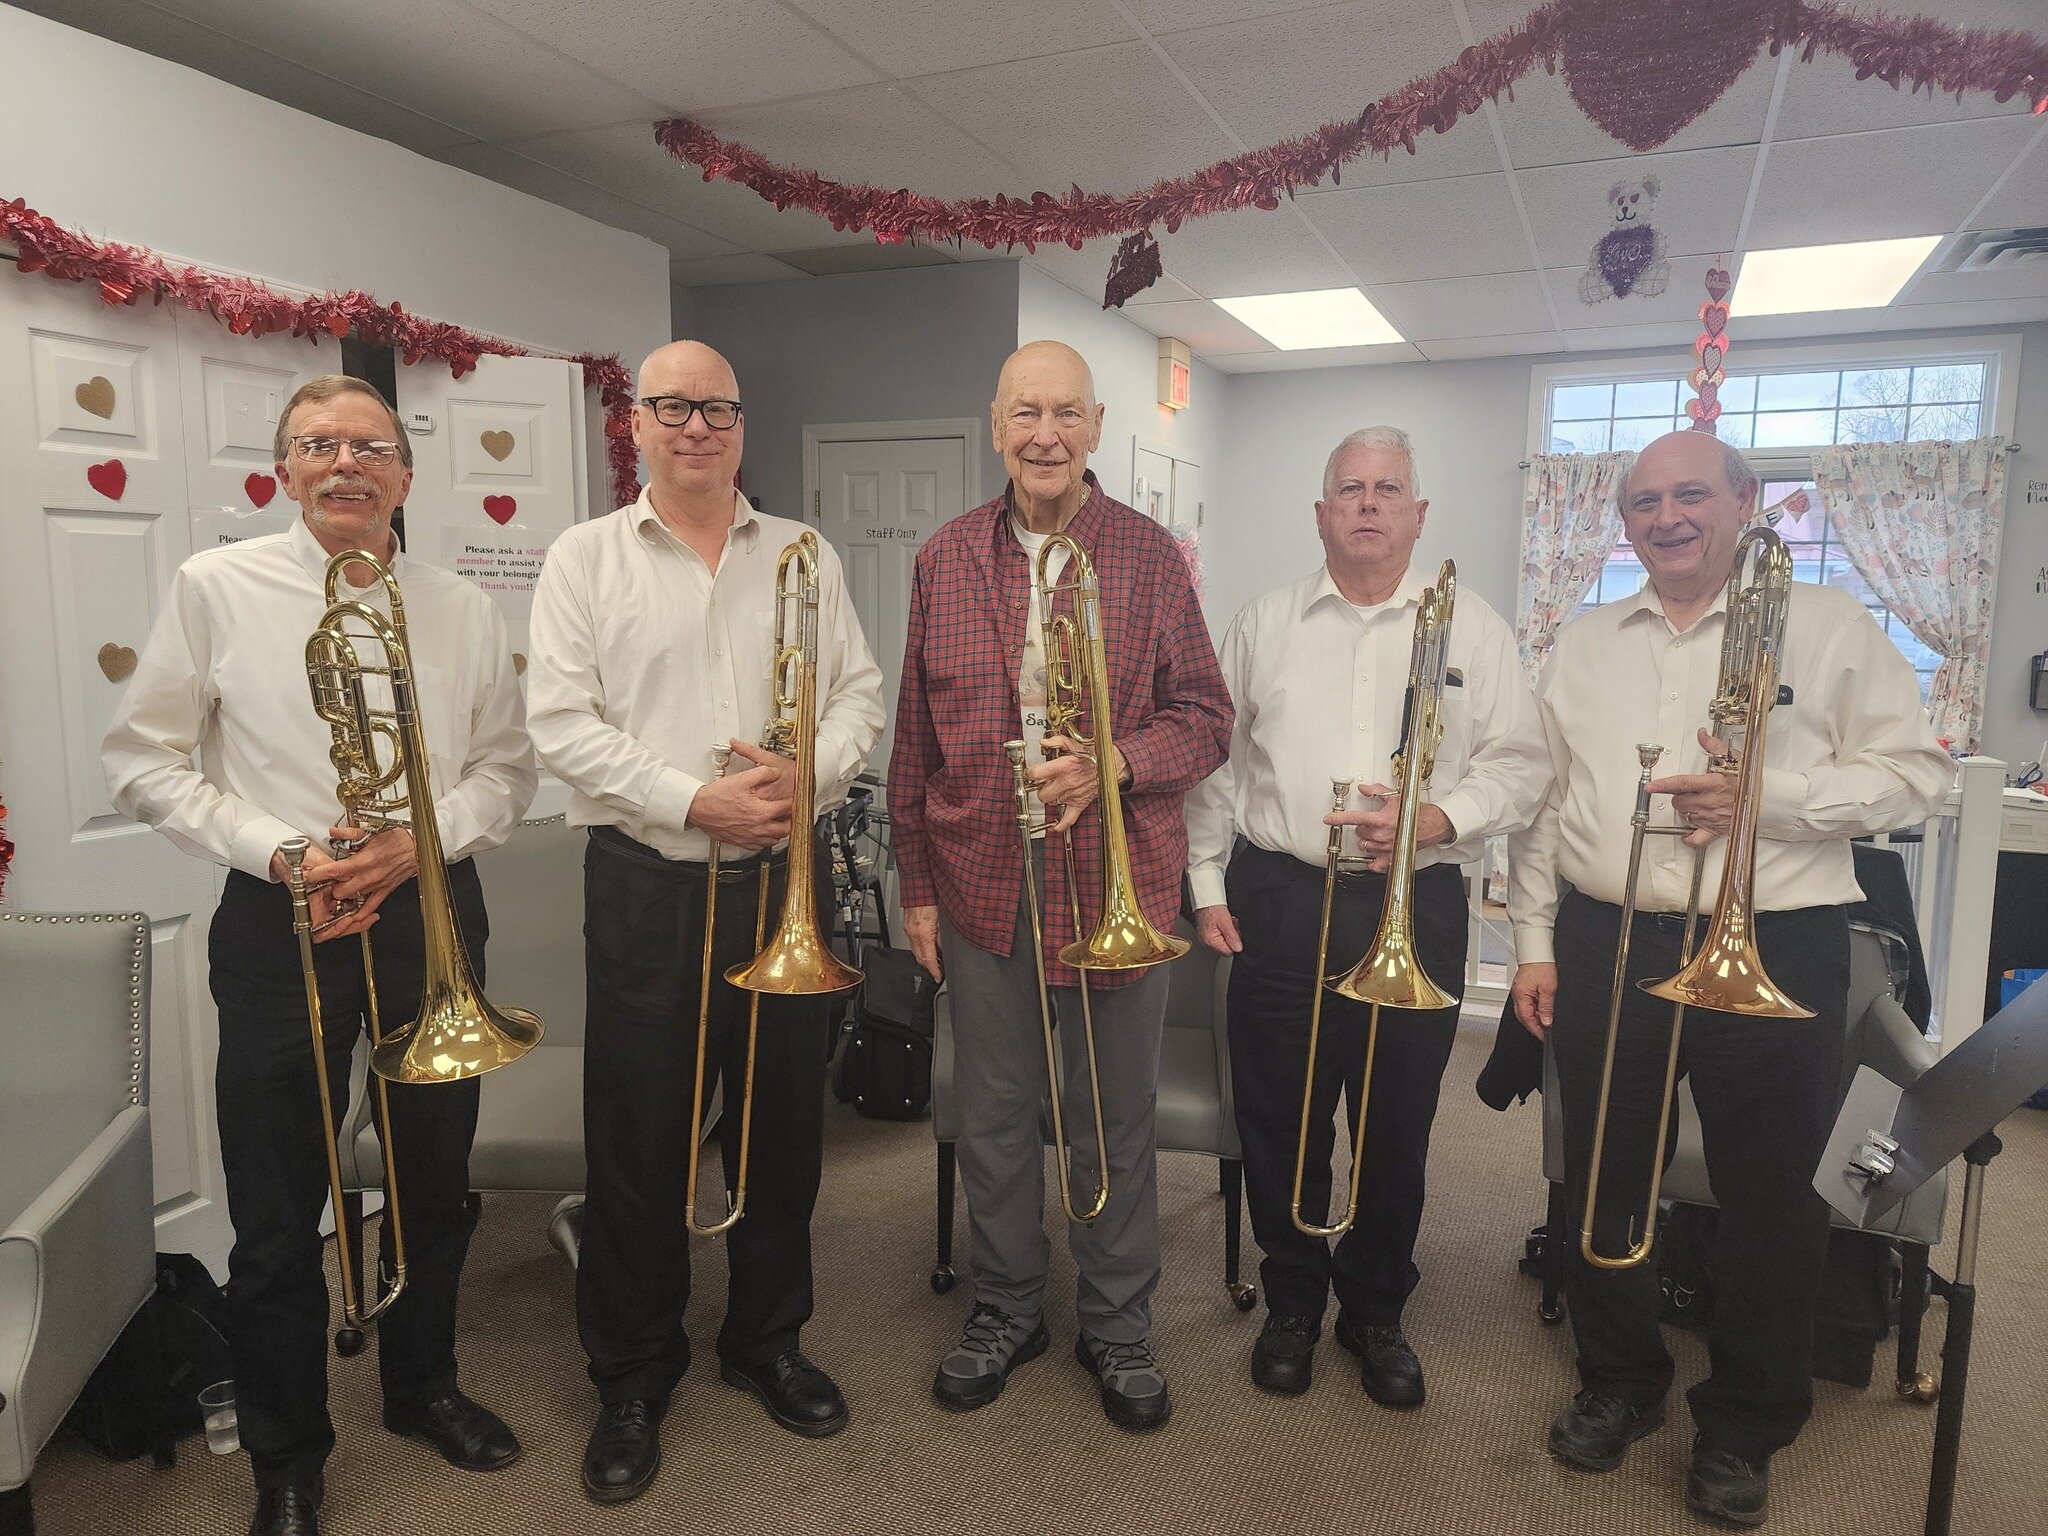 We love when live entertainment comes to Silver Fox! We especially love when our members can join in on the entertainment. Last week, the Brass Act Band graced the Baldwinsville location with their musical talents and our member Karl joined in on the